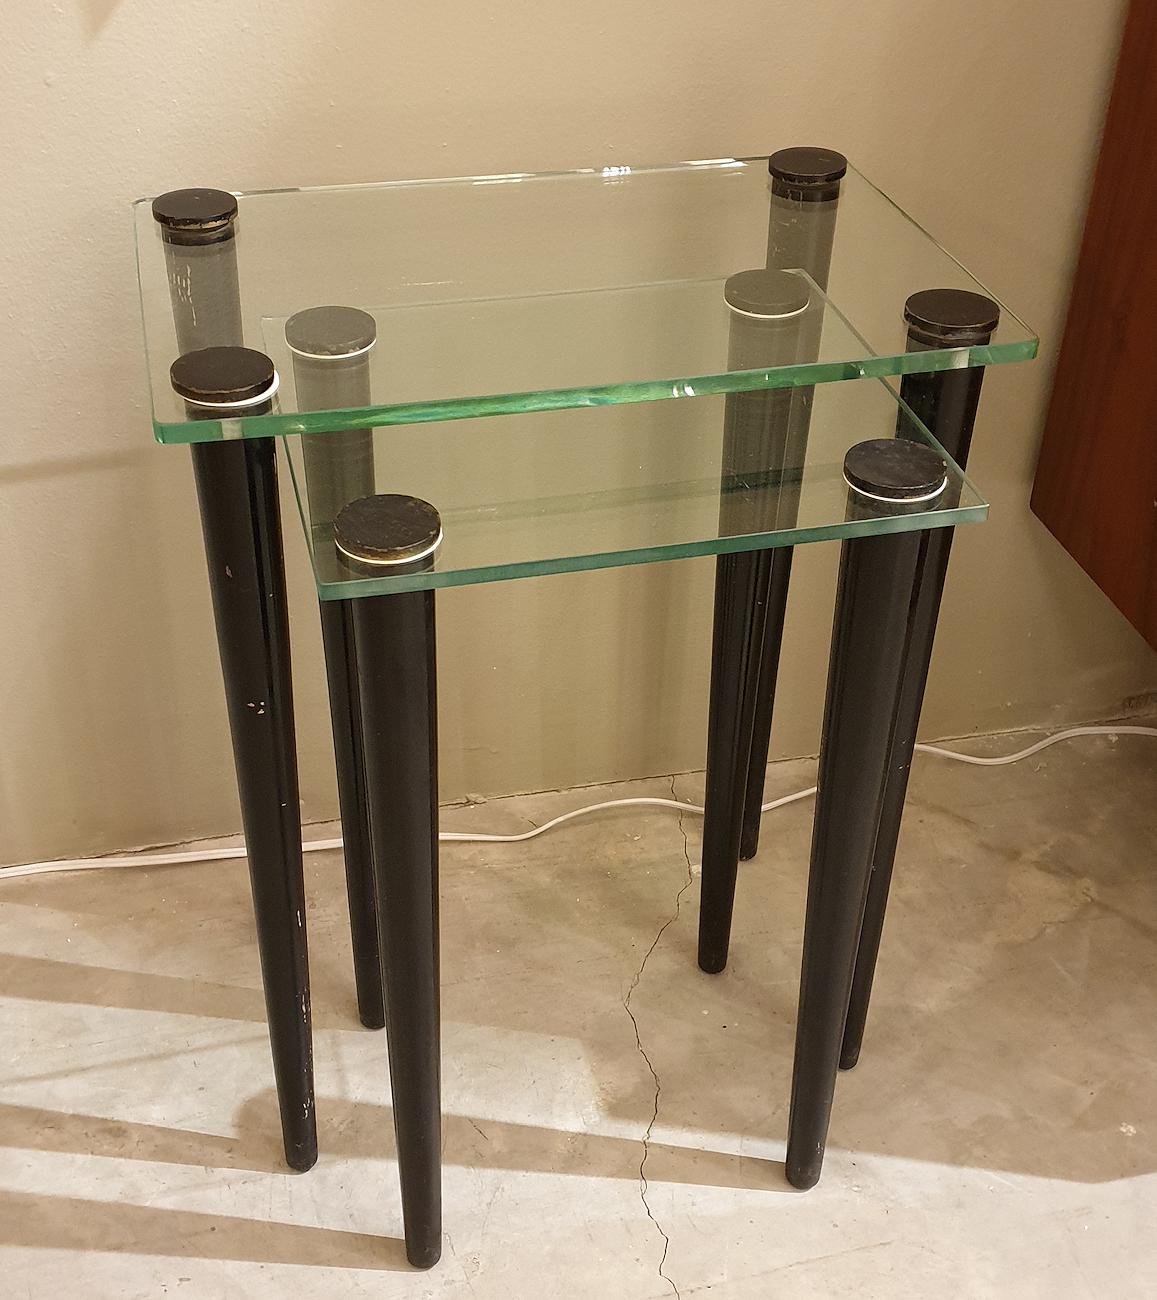 Set of 2 small nesting tables, Mid-Century Modern, Italy, 1960s.
Made of 4 black painted wood legs each, and a clear glass square top.
The elongated legs create a sophisticated design.
Some signs of wear with age on the wood: can be fixed with